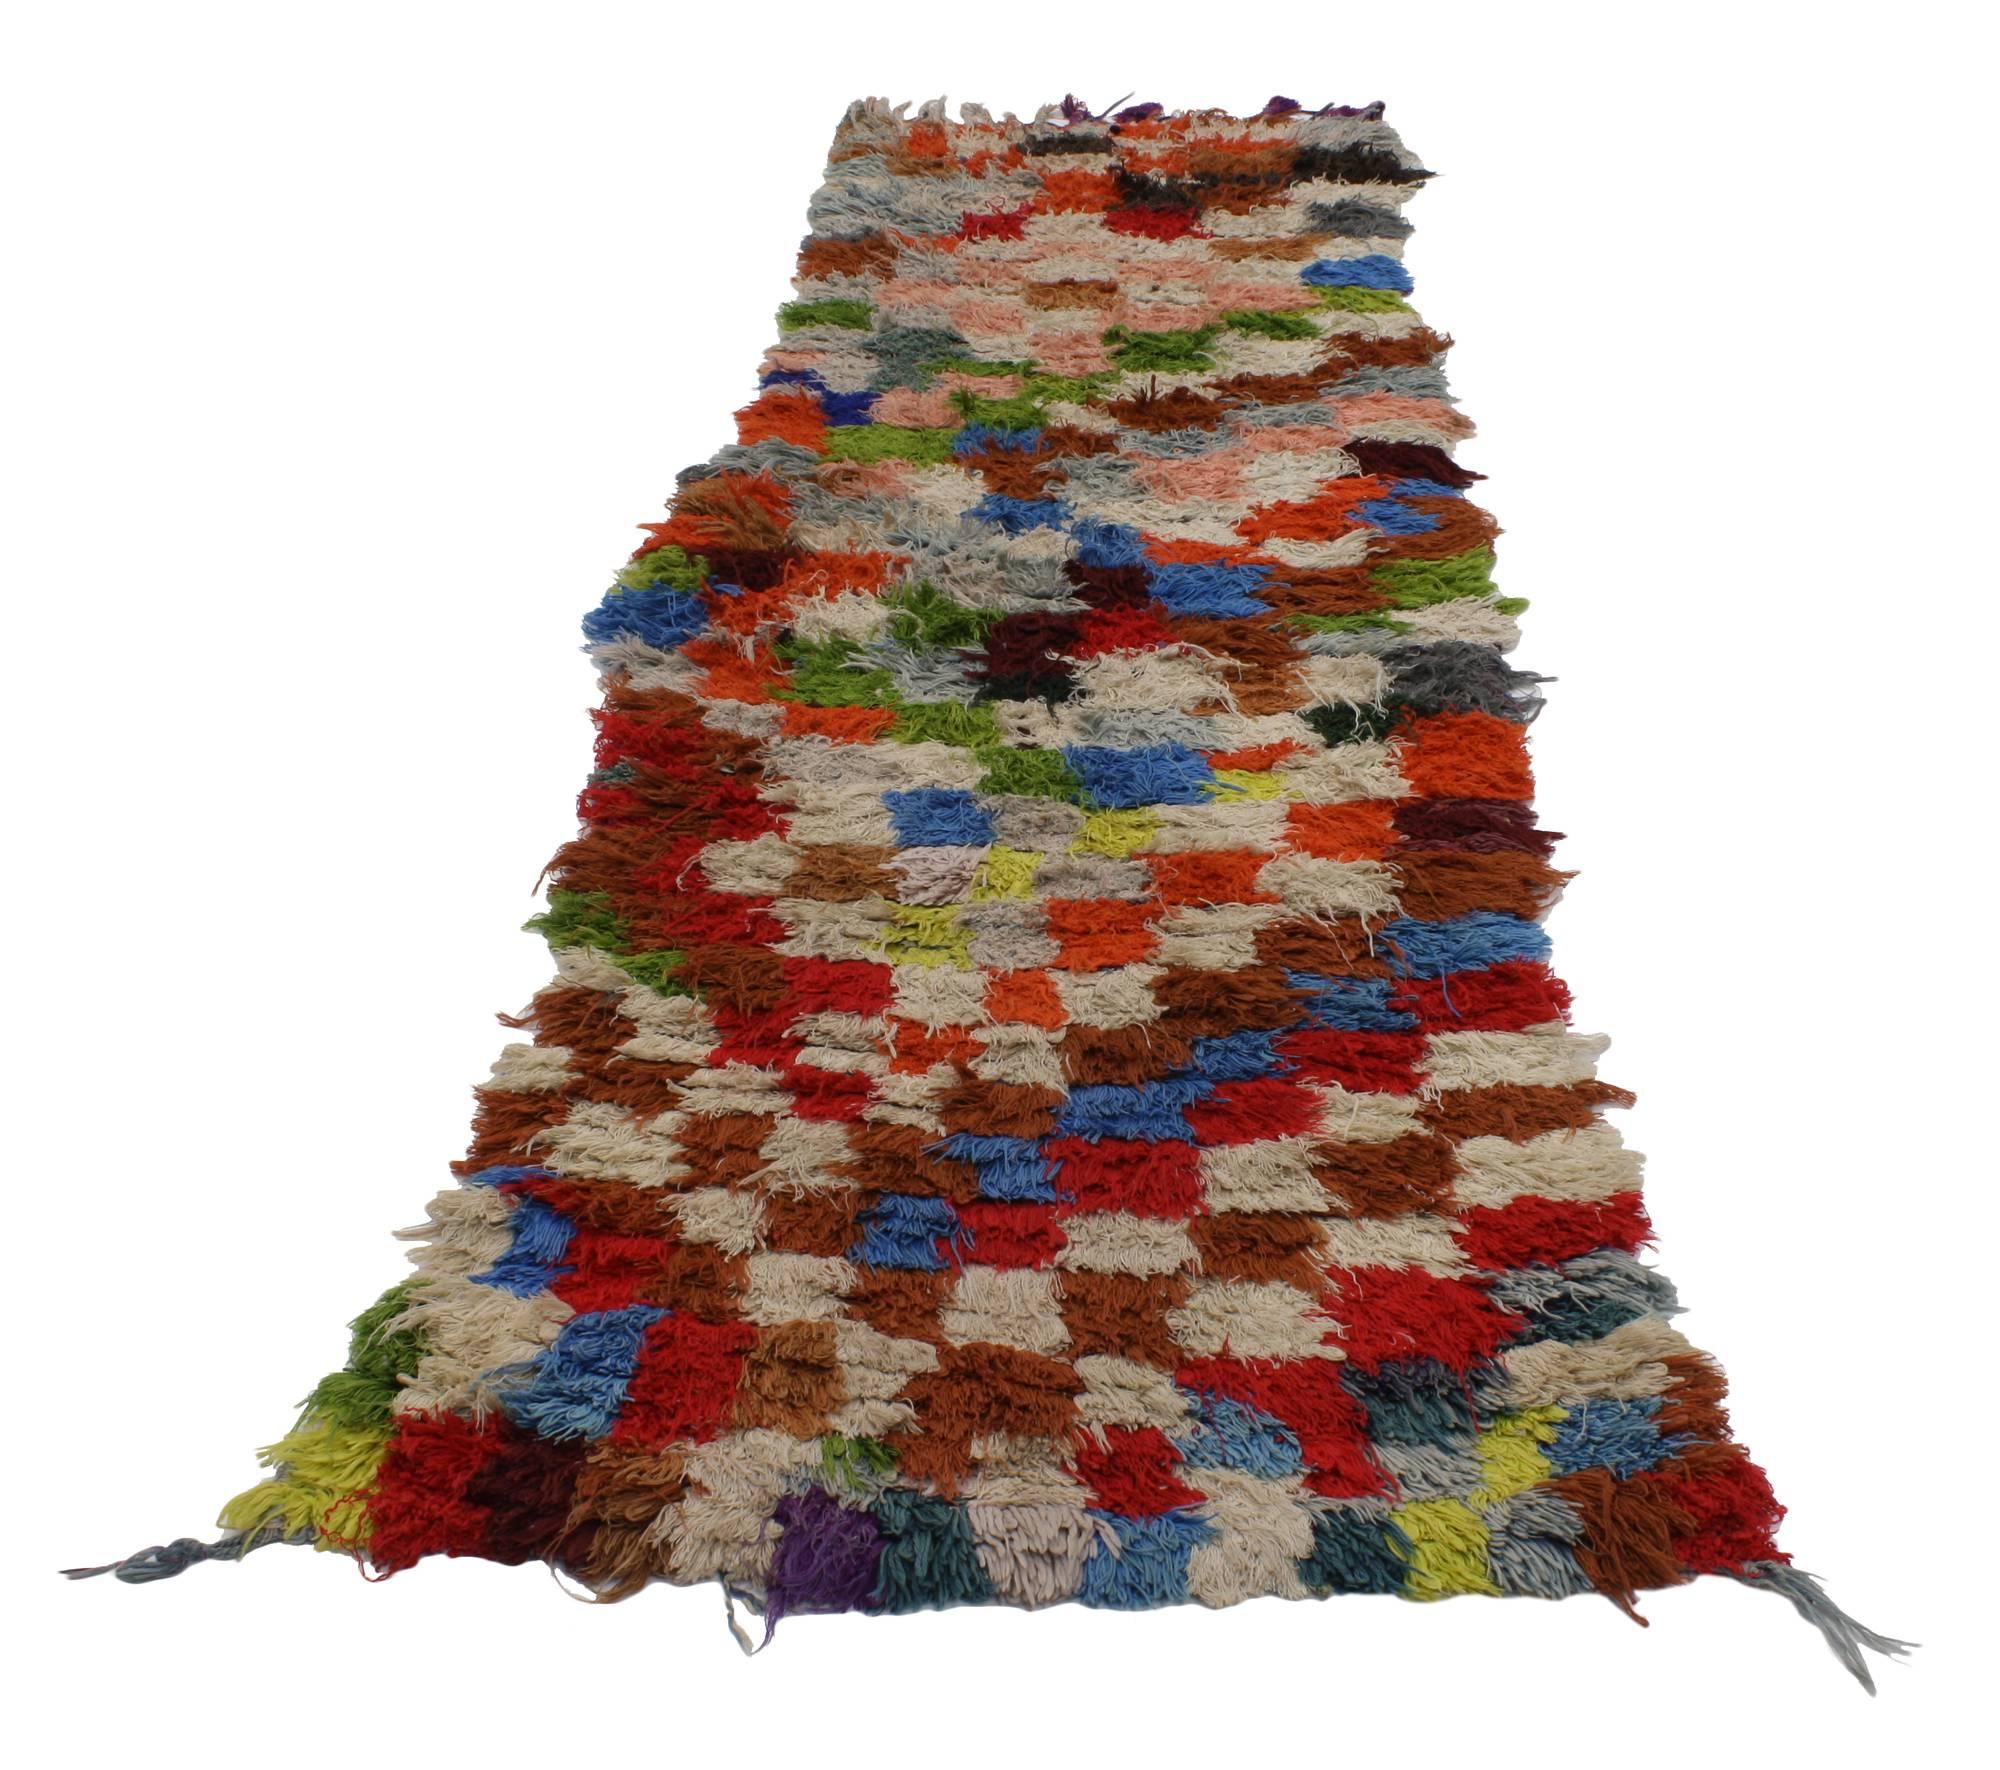 20440, Vintage Berber Moroccan Boucherouite Runner, Moroccan Shag Hallway Runner 02'05 x 07'04. This colorful vintage Berber Moroccan Boucherouite runner features an all-over square pattern. The squares unite to form a truly unique look. Squares